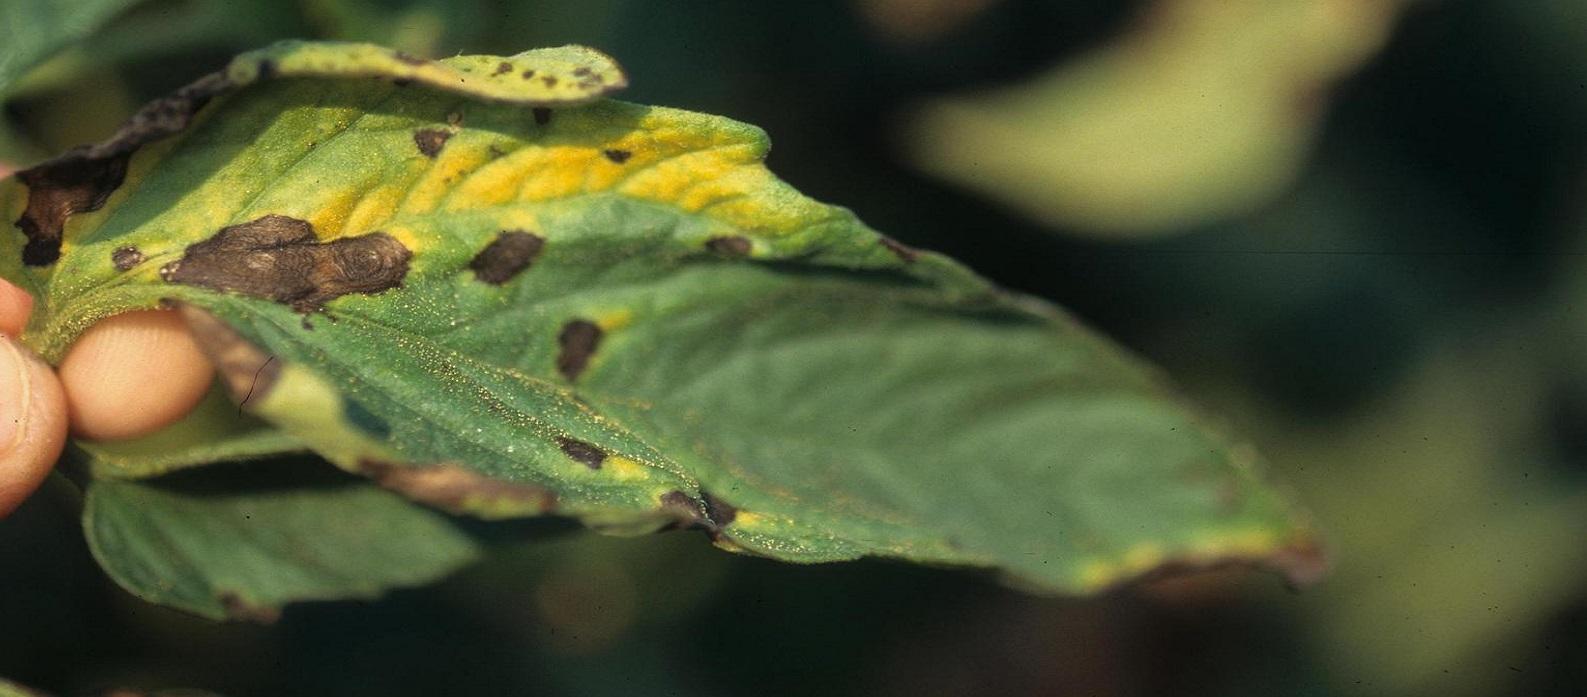 early blight leaf lesion on tomato plant